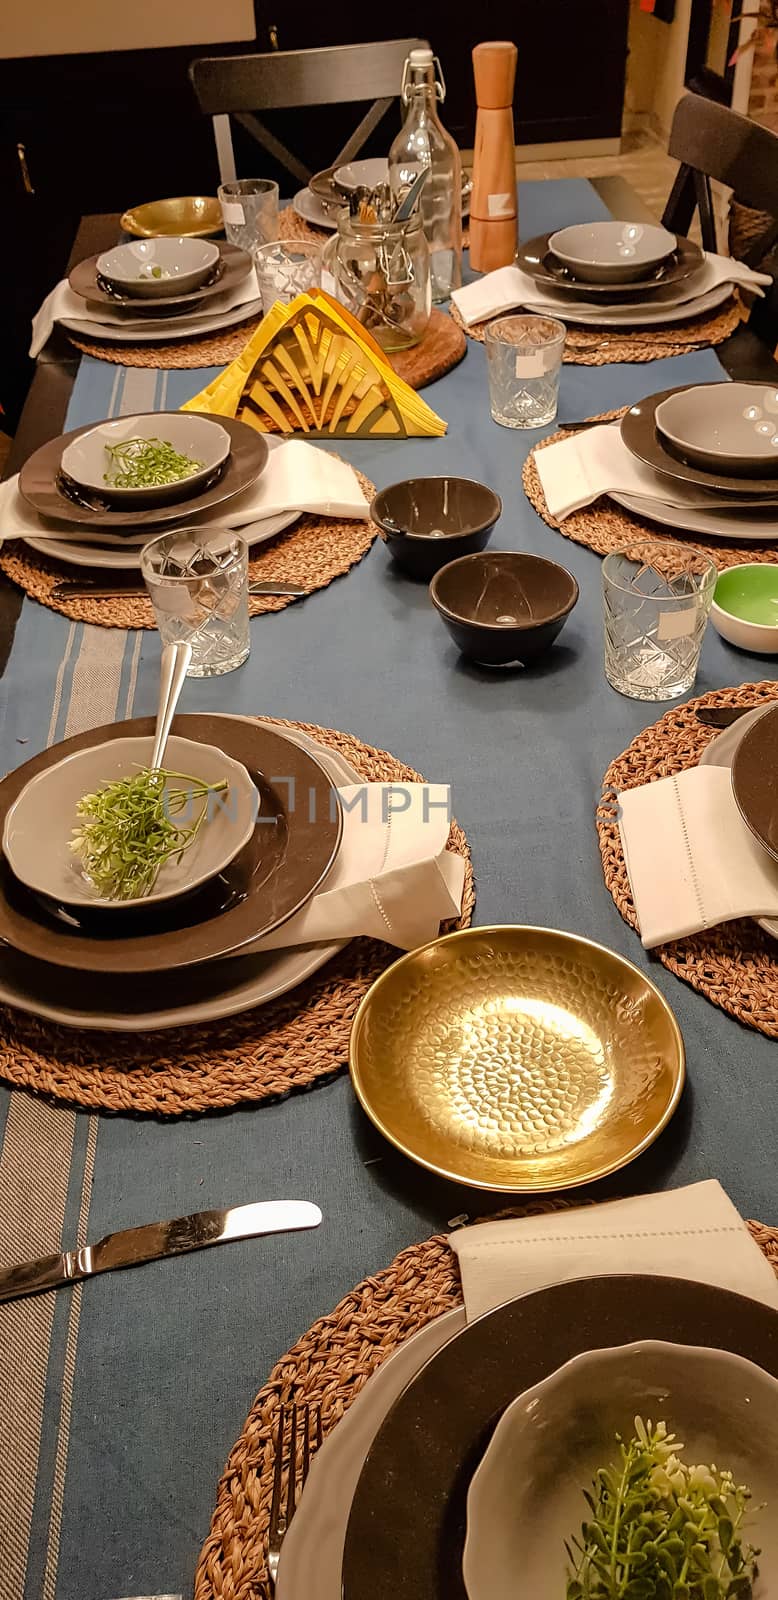 Festively decorated table    by JFsPic